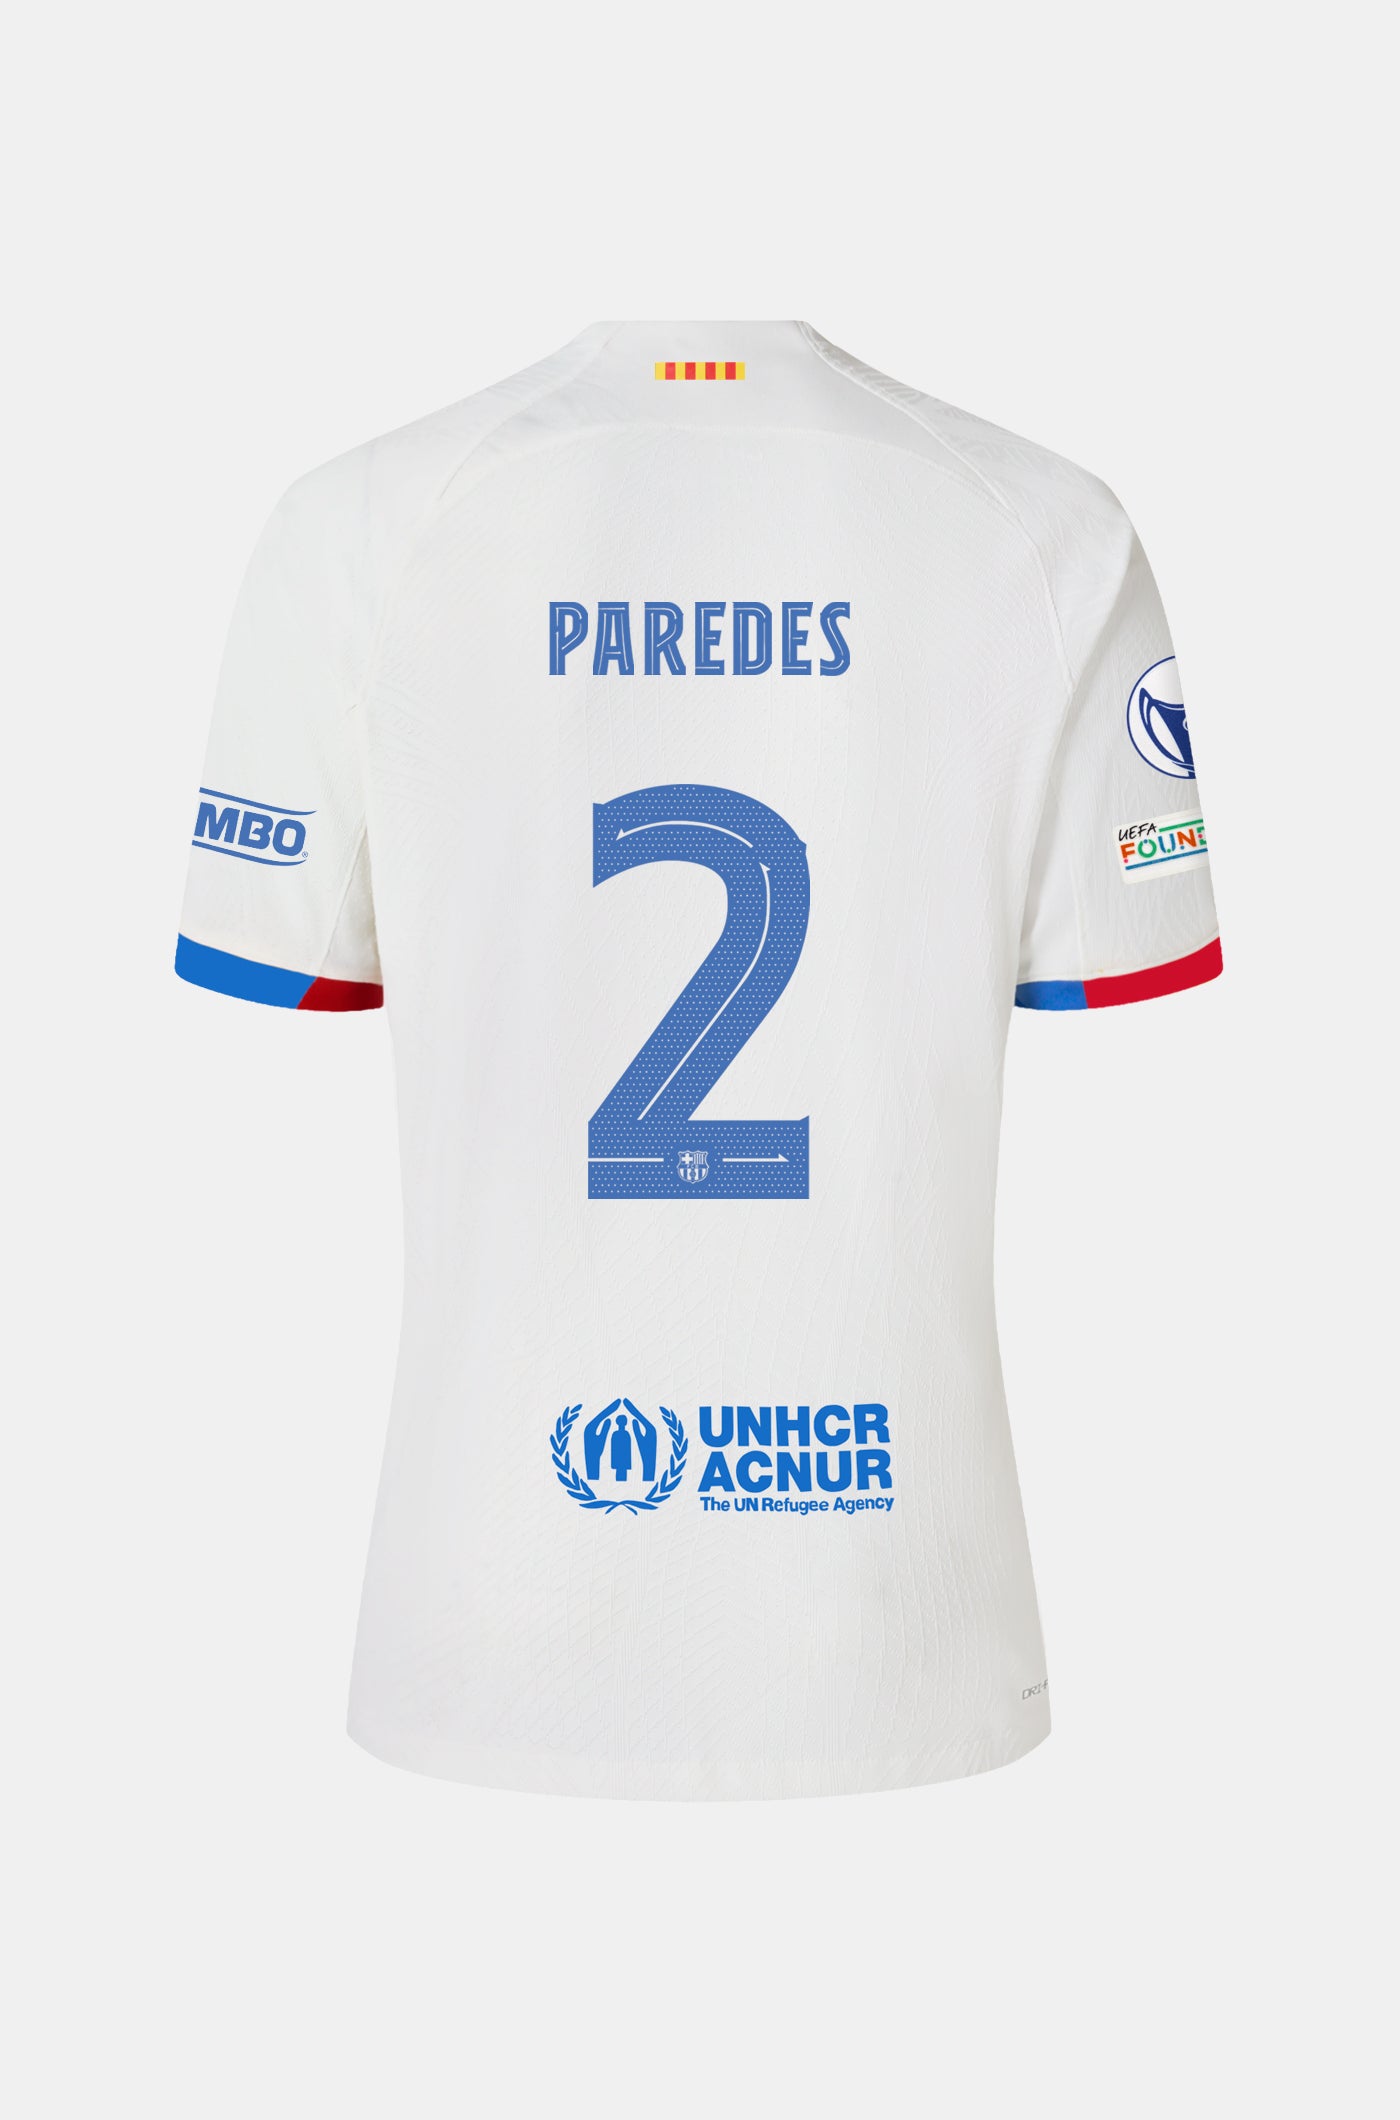 UWCL FC Barcelona away shirt 23/24 Player's Edition - PAREDES